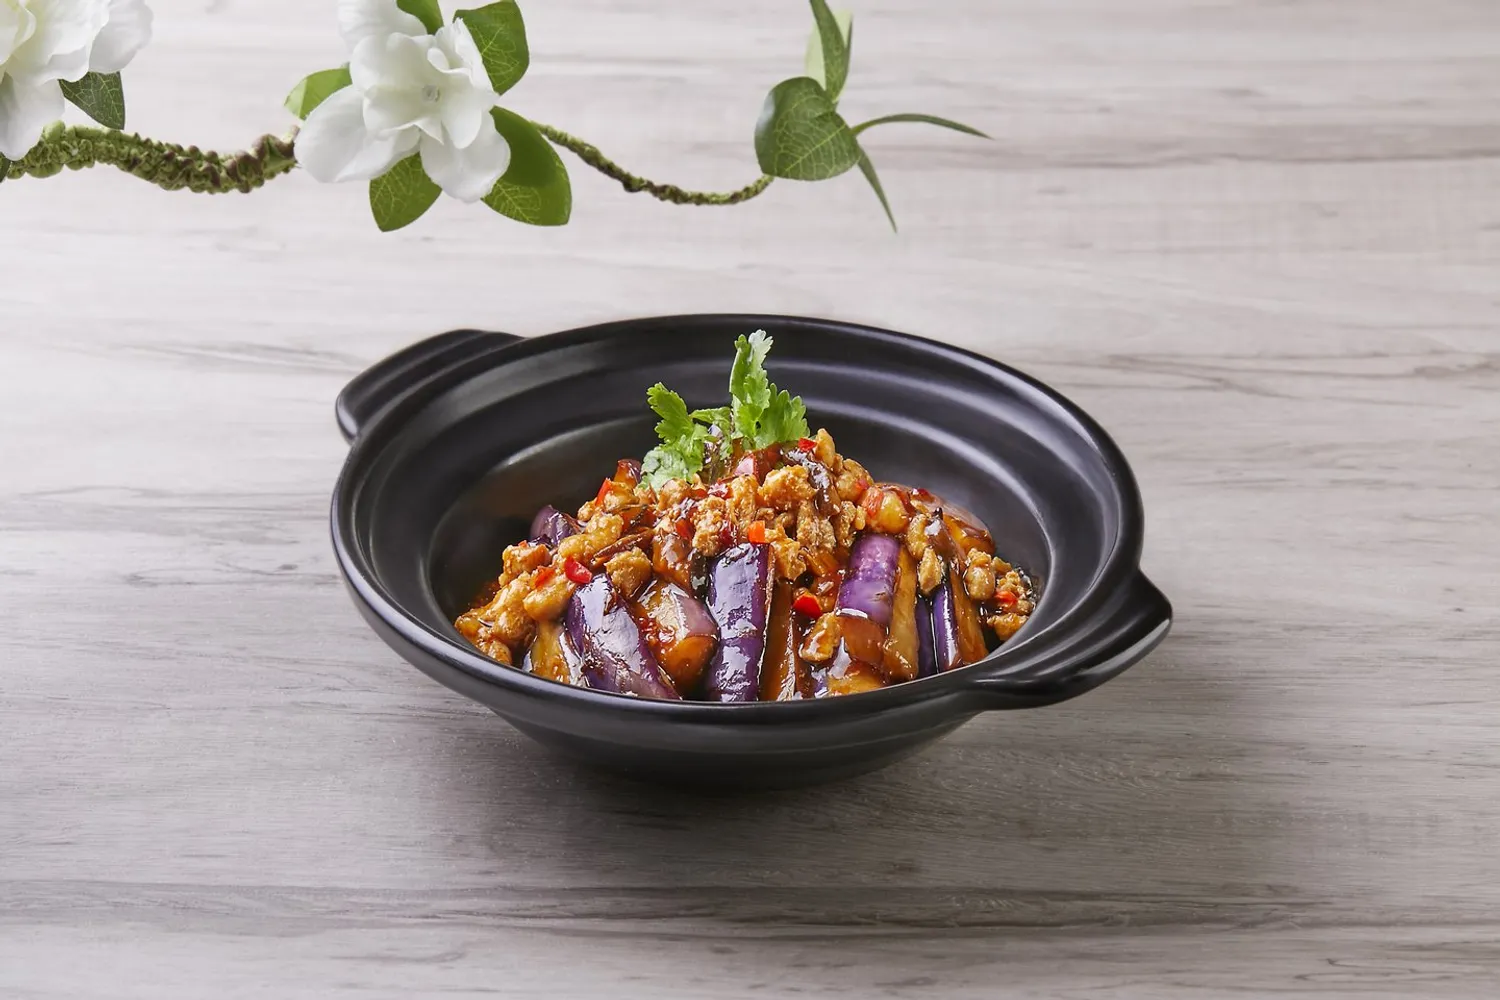 Eggplant in Claypot with Minced Meat